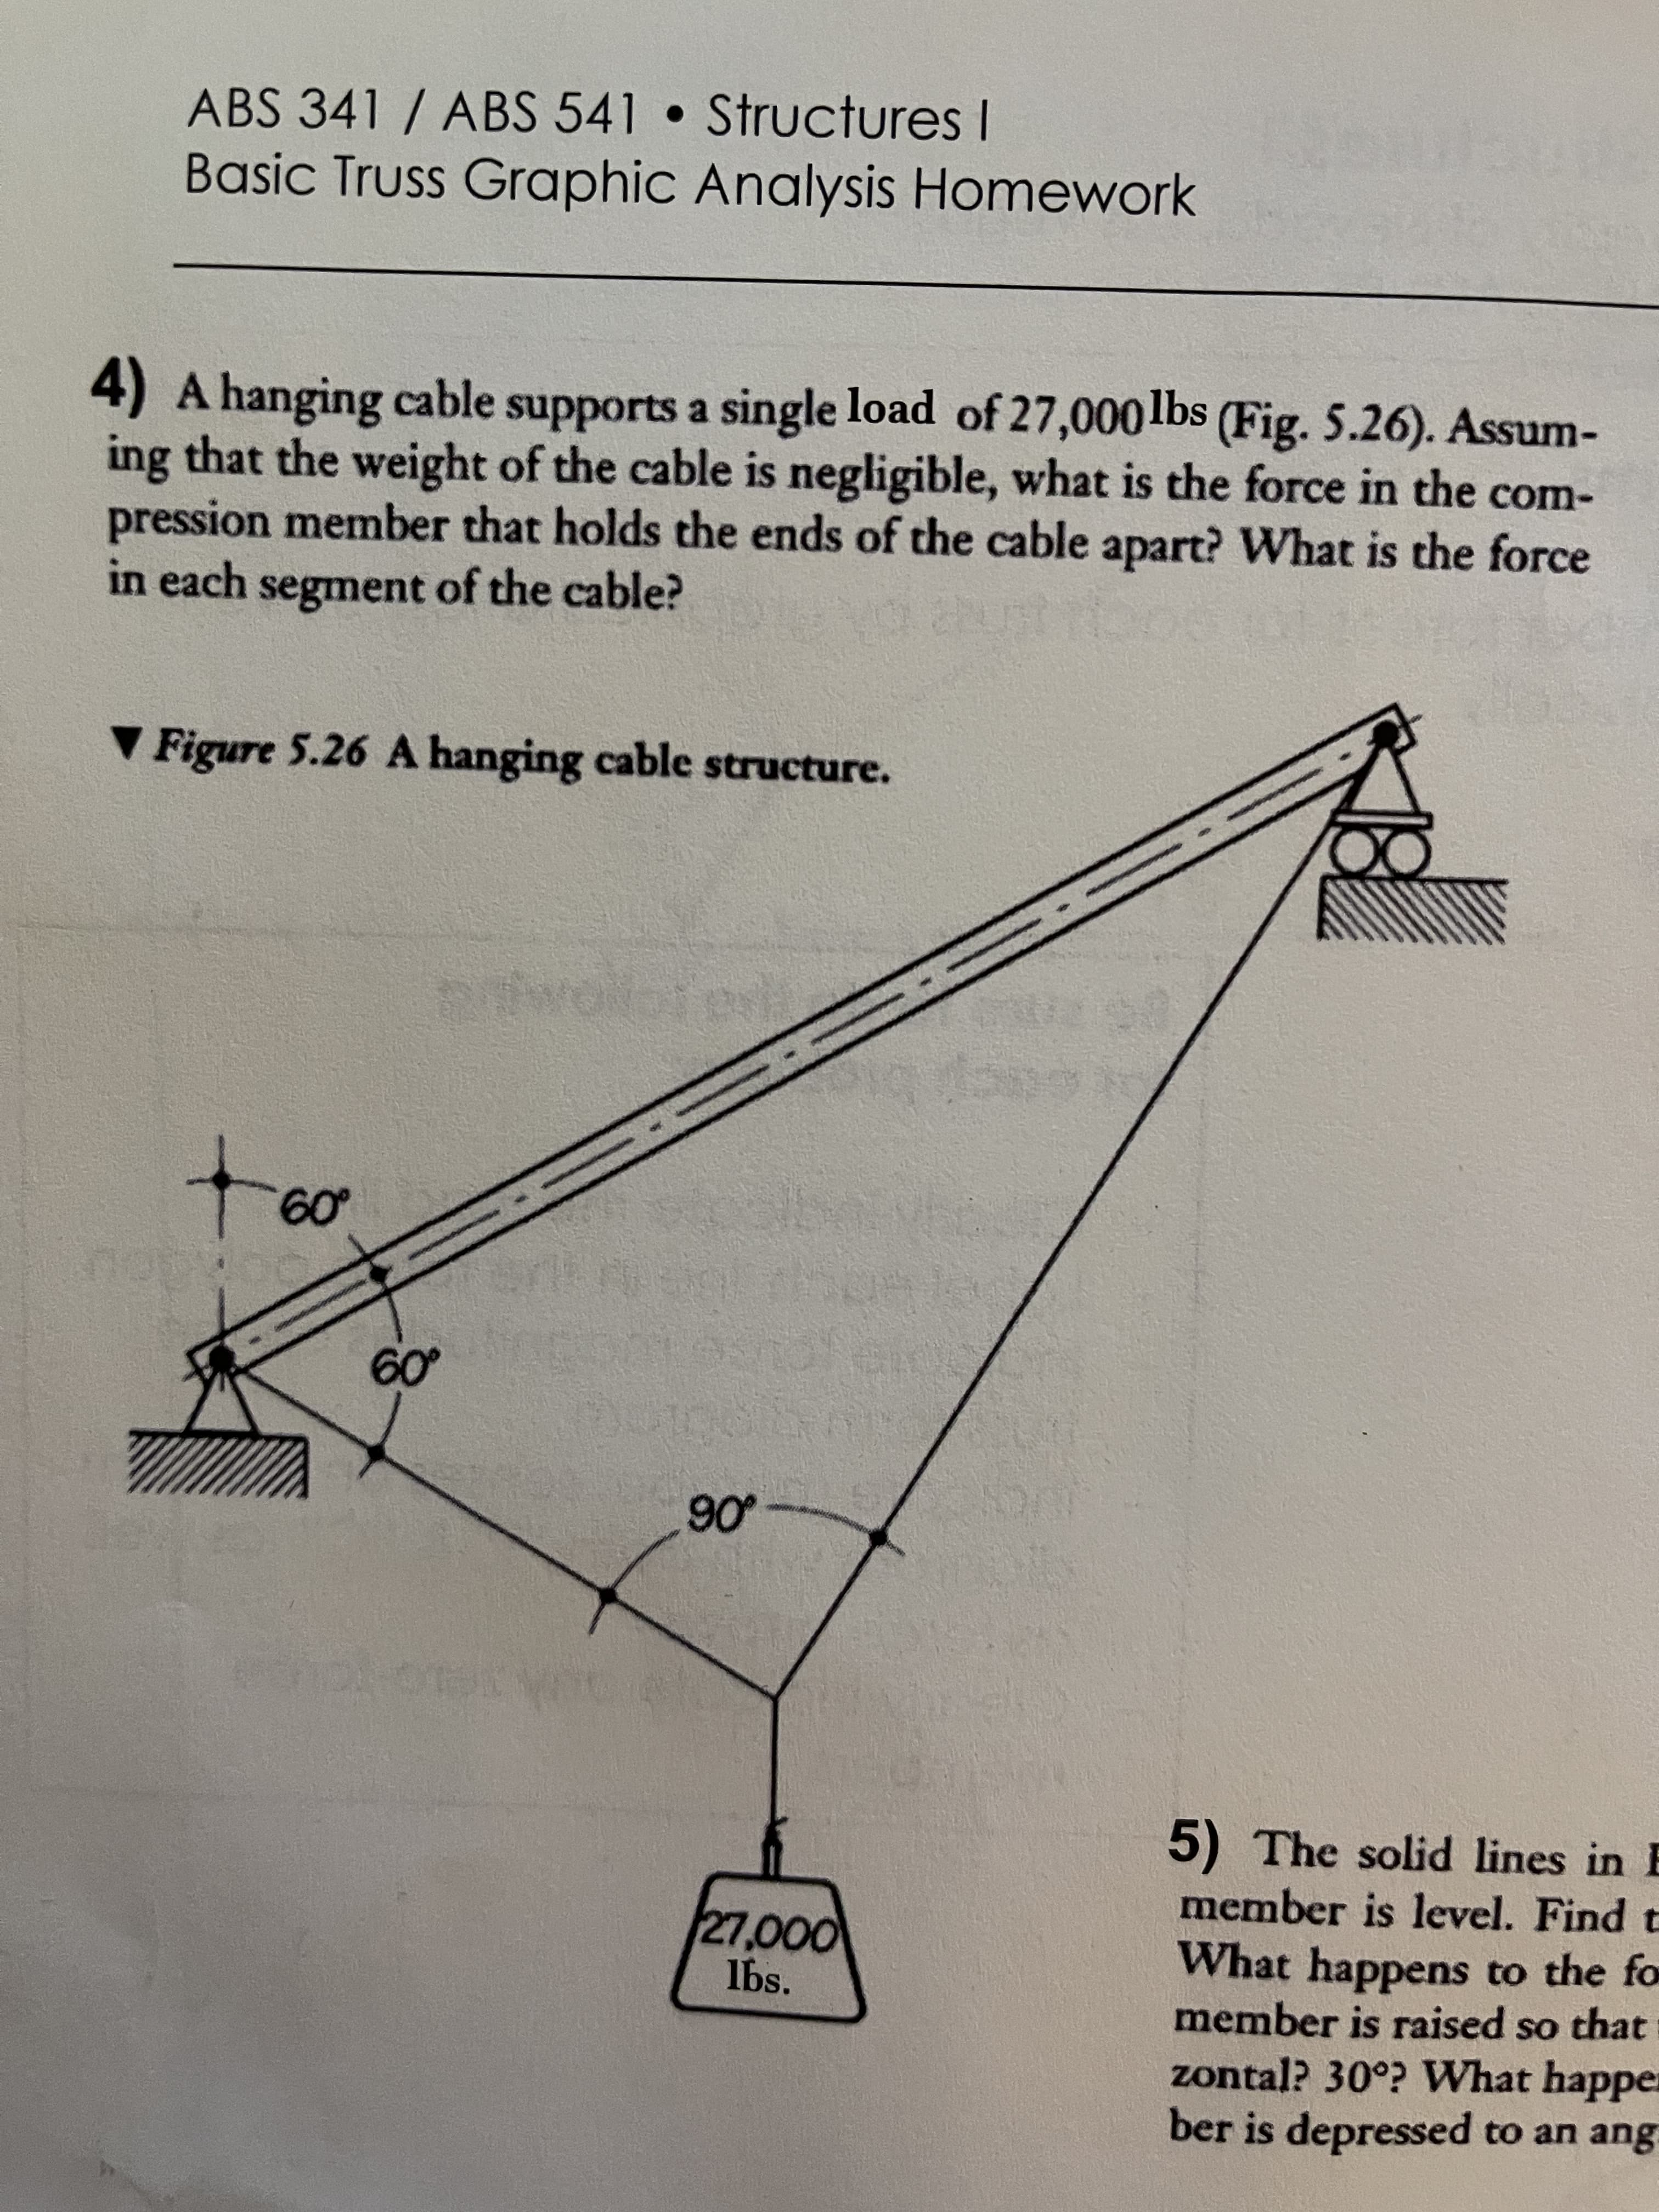 ABS 341 / ABS 541 Structures I
Basic Truss Graphic Analysis Homework
4) A hanging cabl
ing that the weight of the cable is negligible, what is the force in the com-
pression member that holds the ends of the cable apart? What is the force
in each segment of the cable?
e supports a single load of 27,000lbs (Fig. 5.26). Assum-
V Figure 5.26 A hanging cable structure.
09
06
5) The solid lines in E
member is level. Find t
0000
lbs.
What happens to the fo
member is raised so that
OS
zontal? 30°? What happe:
ber is depressed to an ang
